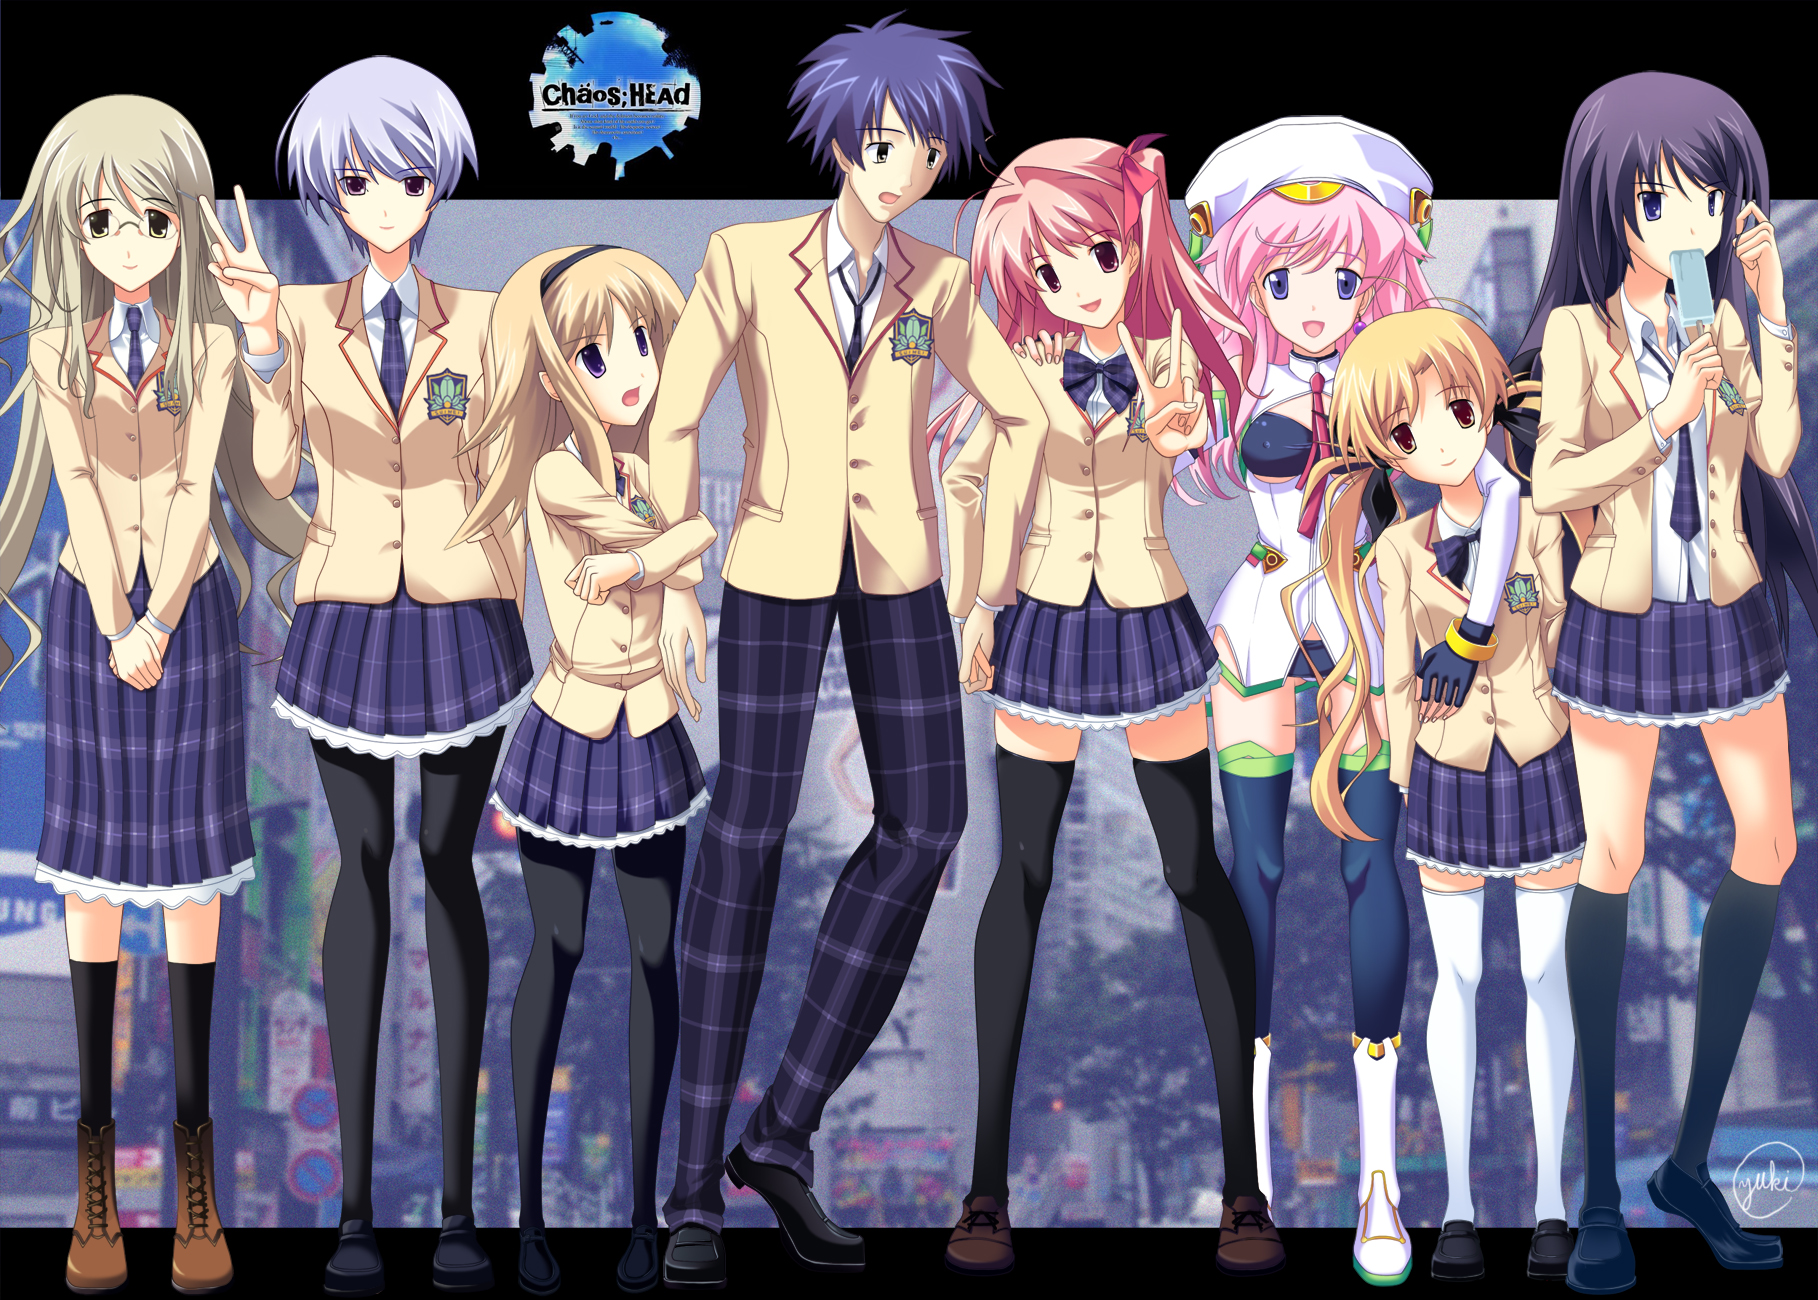 1818x1300 > Chaos;Head Wallpapers